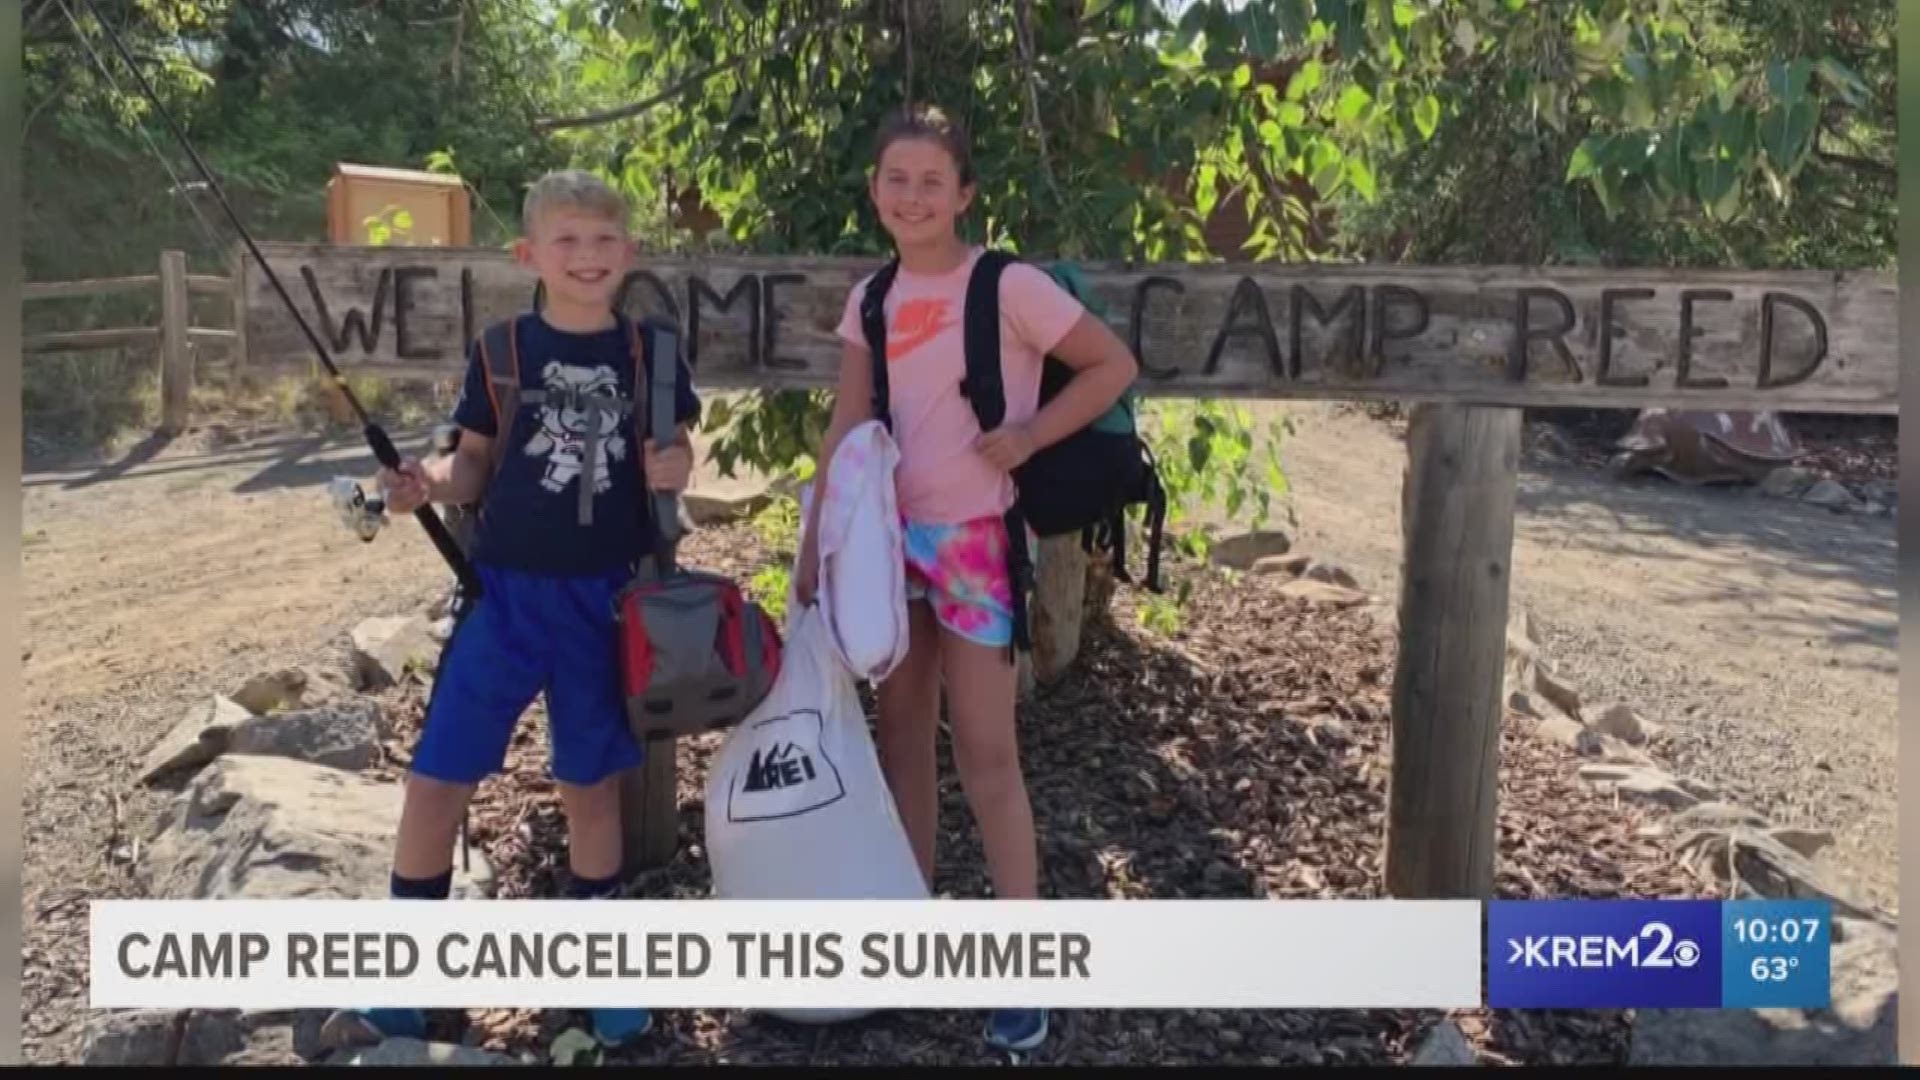 The traditional Camp Reed program was canceled due to coronavirus concerns, but kids can still take part in day and virtual camps, and families can rent cabins.